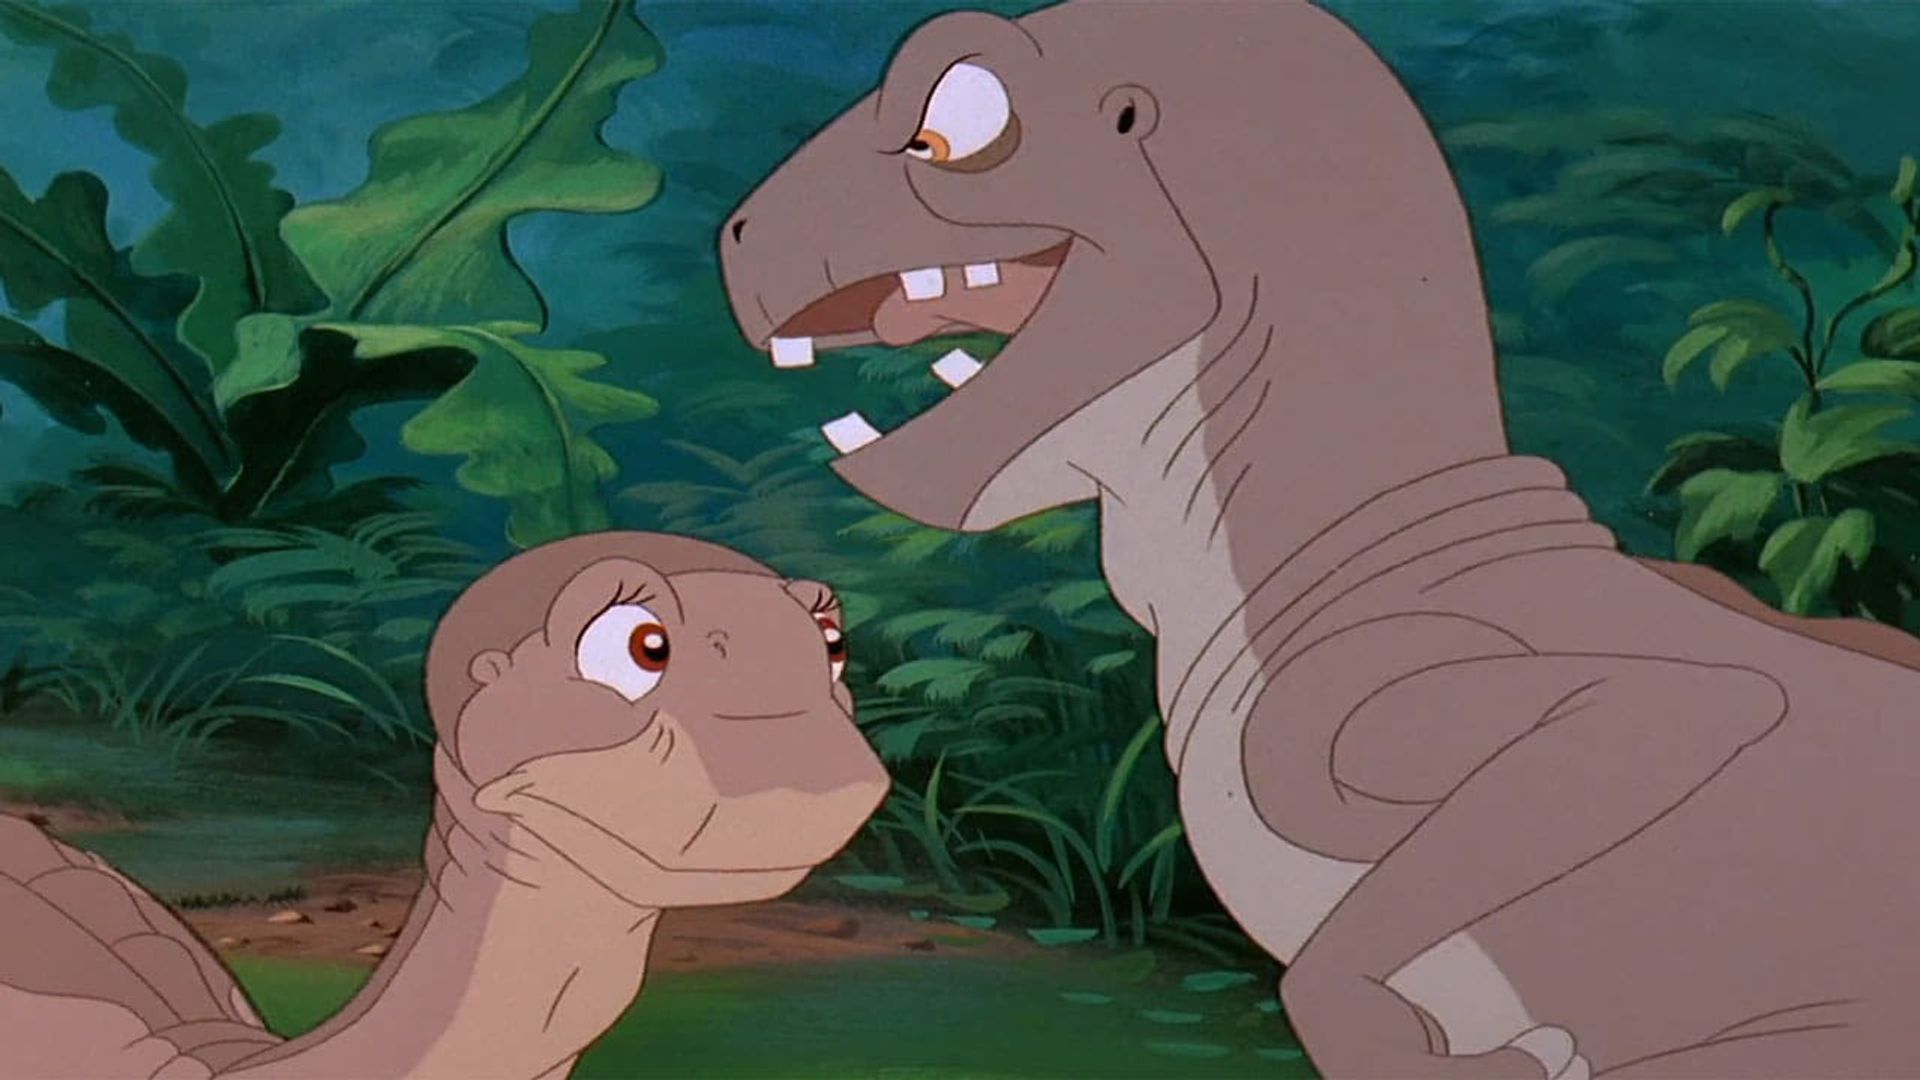 The Land Before Time III: The Time of the Great Giving background